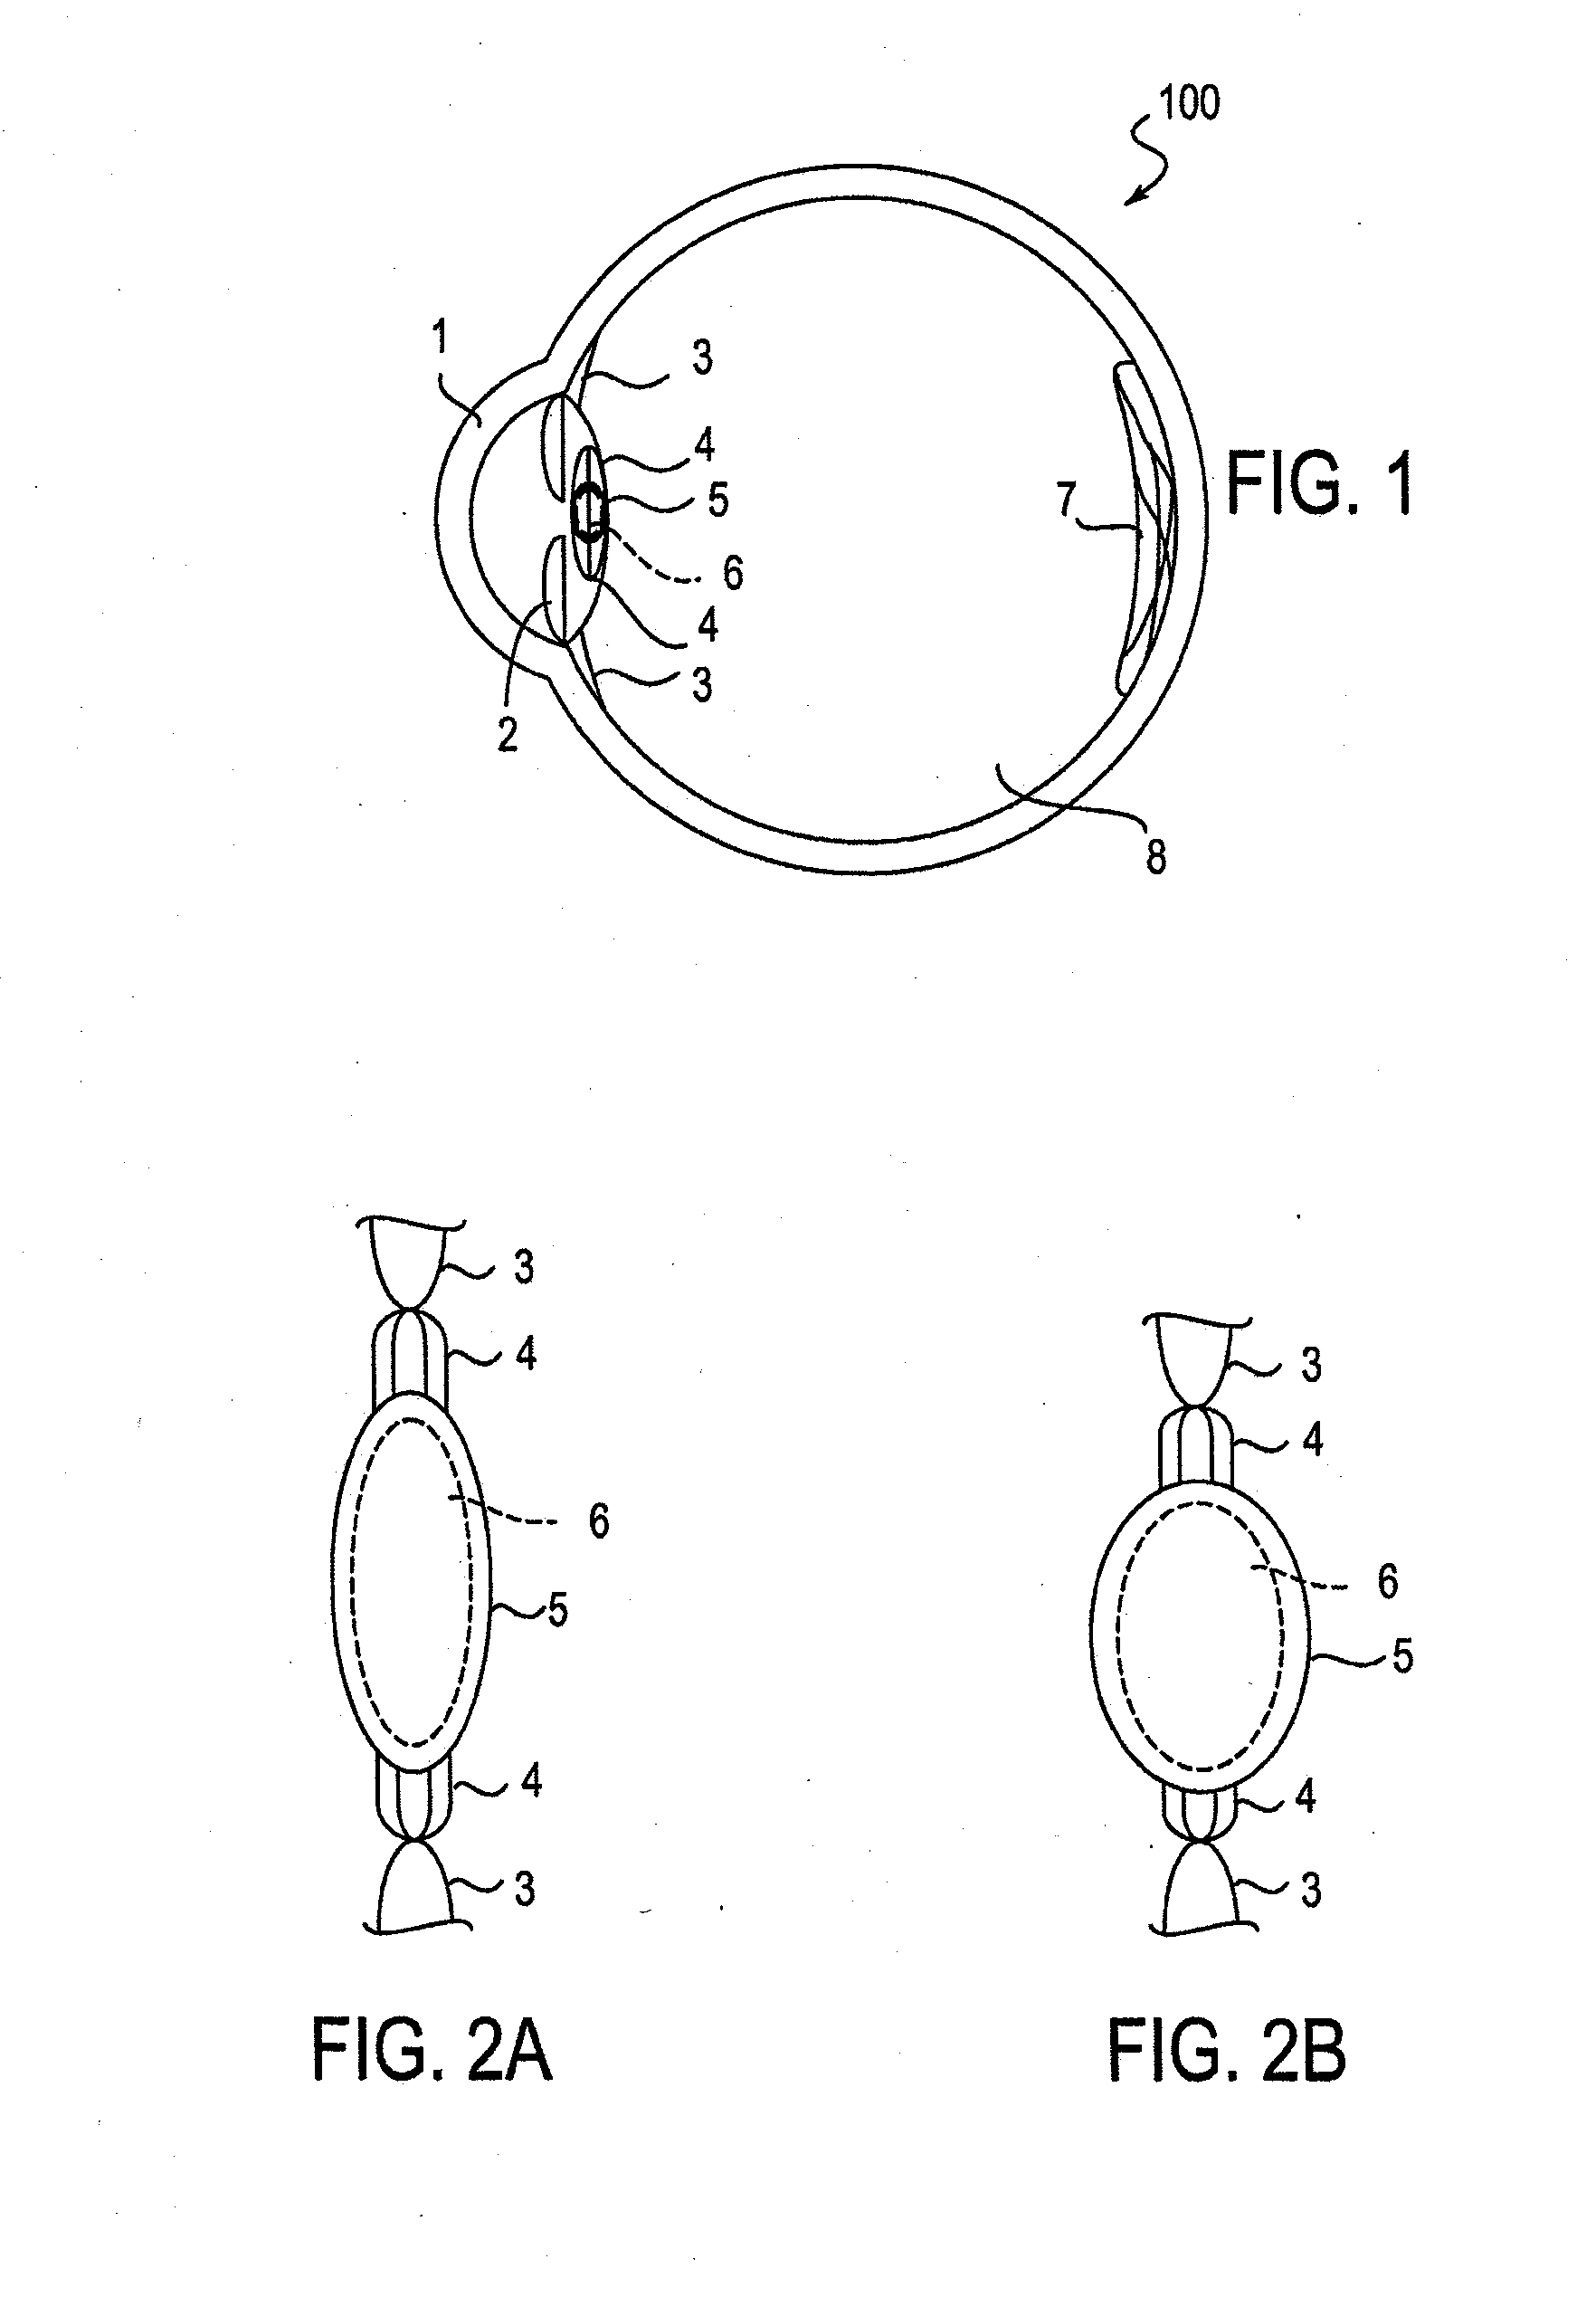 Systems and Methods for Testing Intraocular Lenses